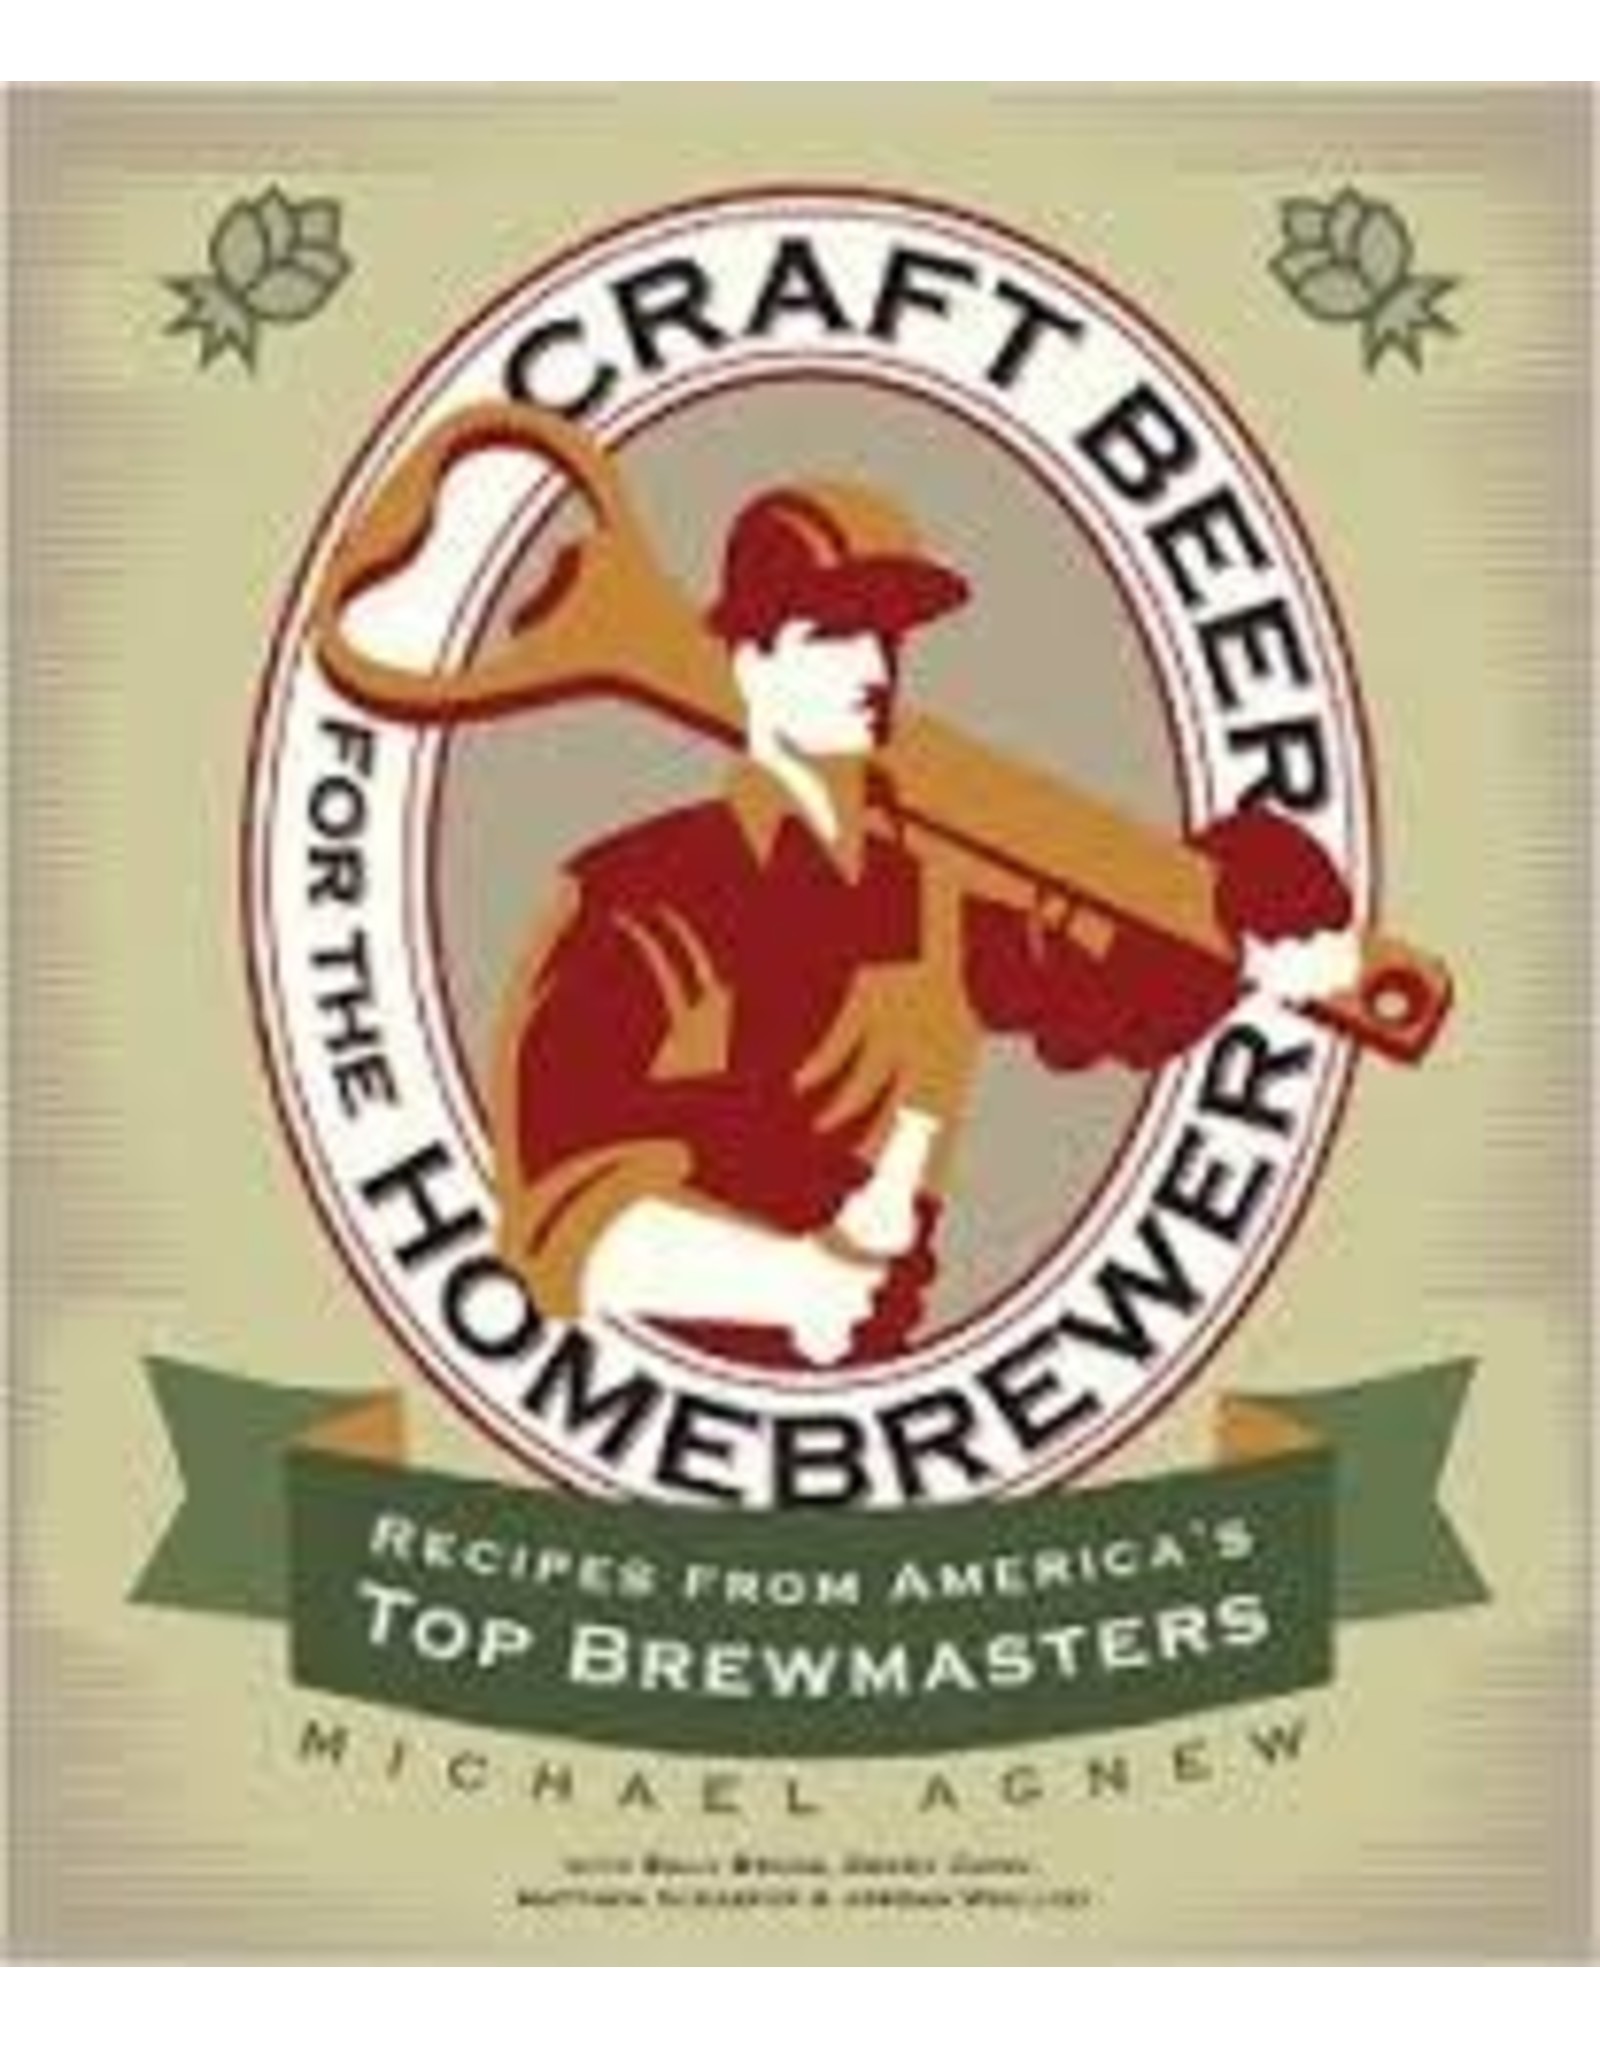 CRAFT BEER FOR THE HOMEBREWER